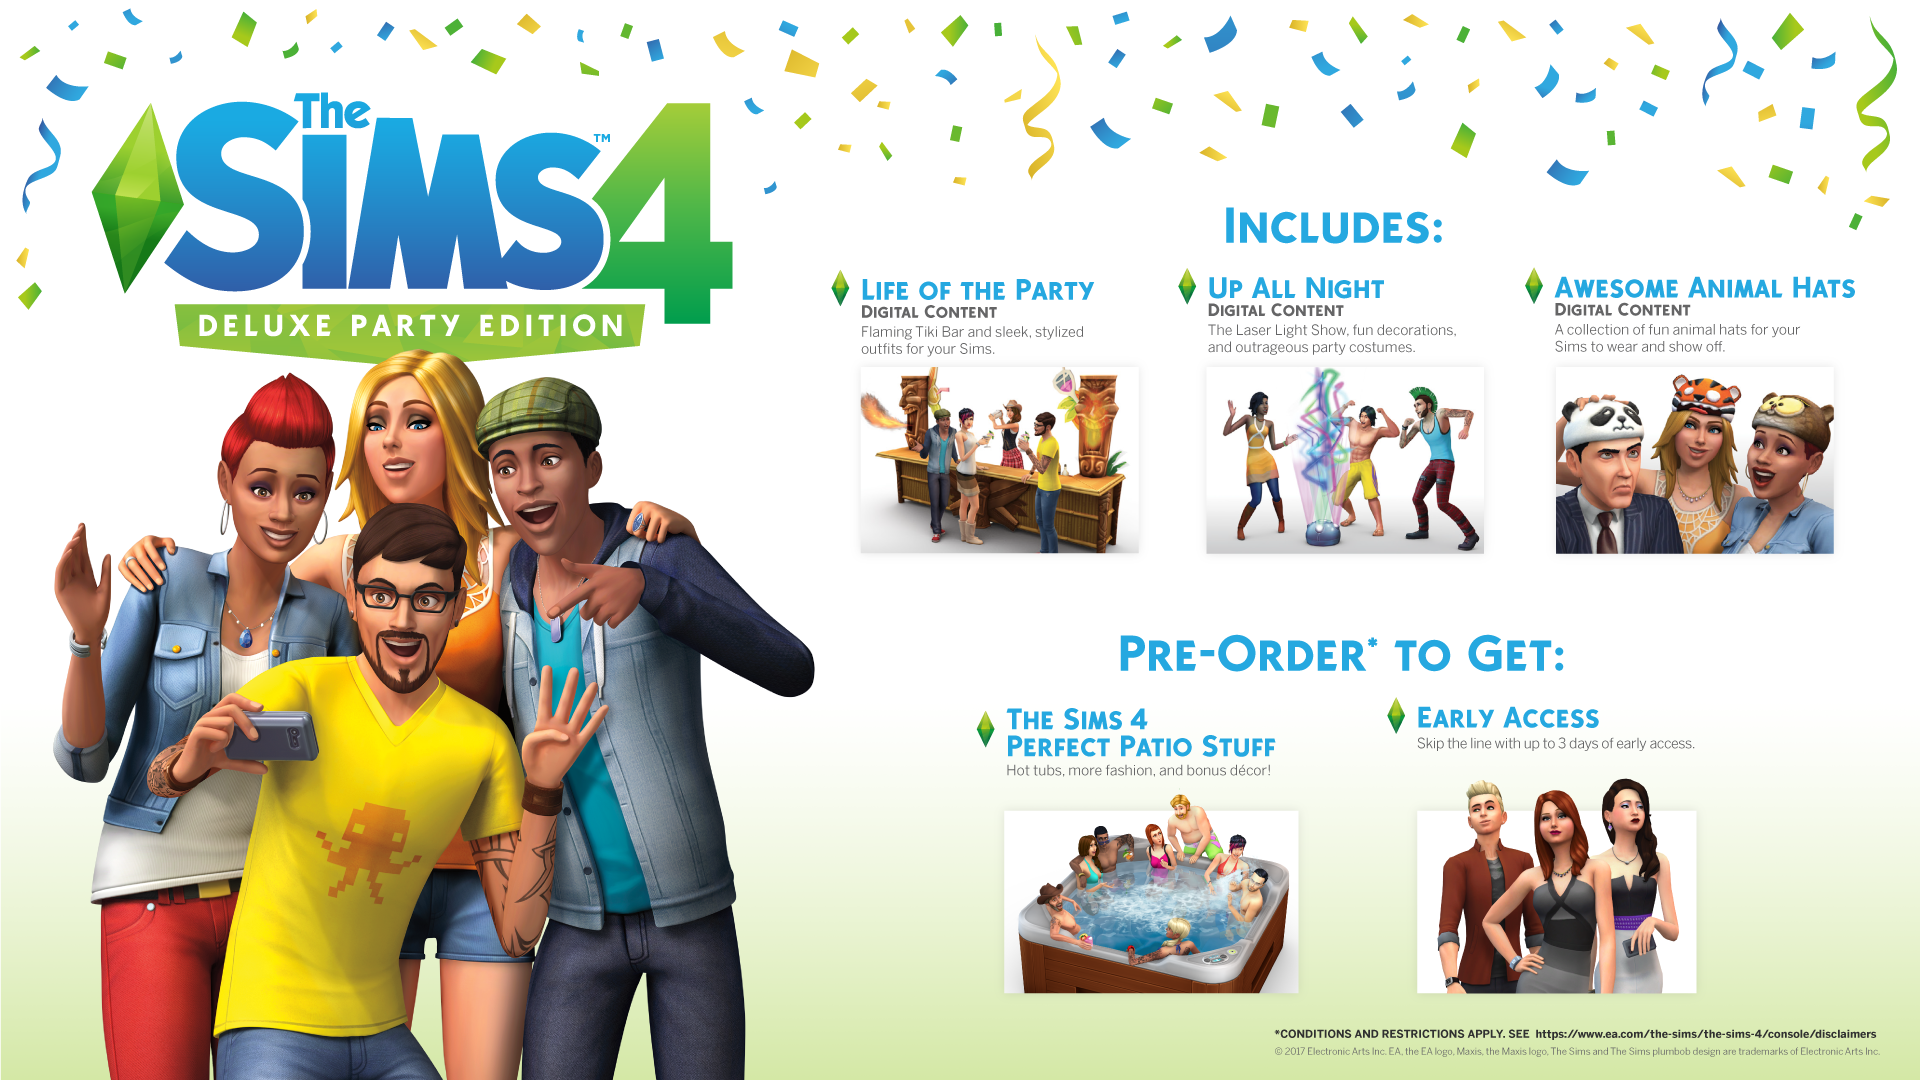 sims 2 ultimate collection mac